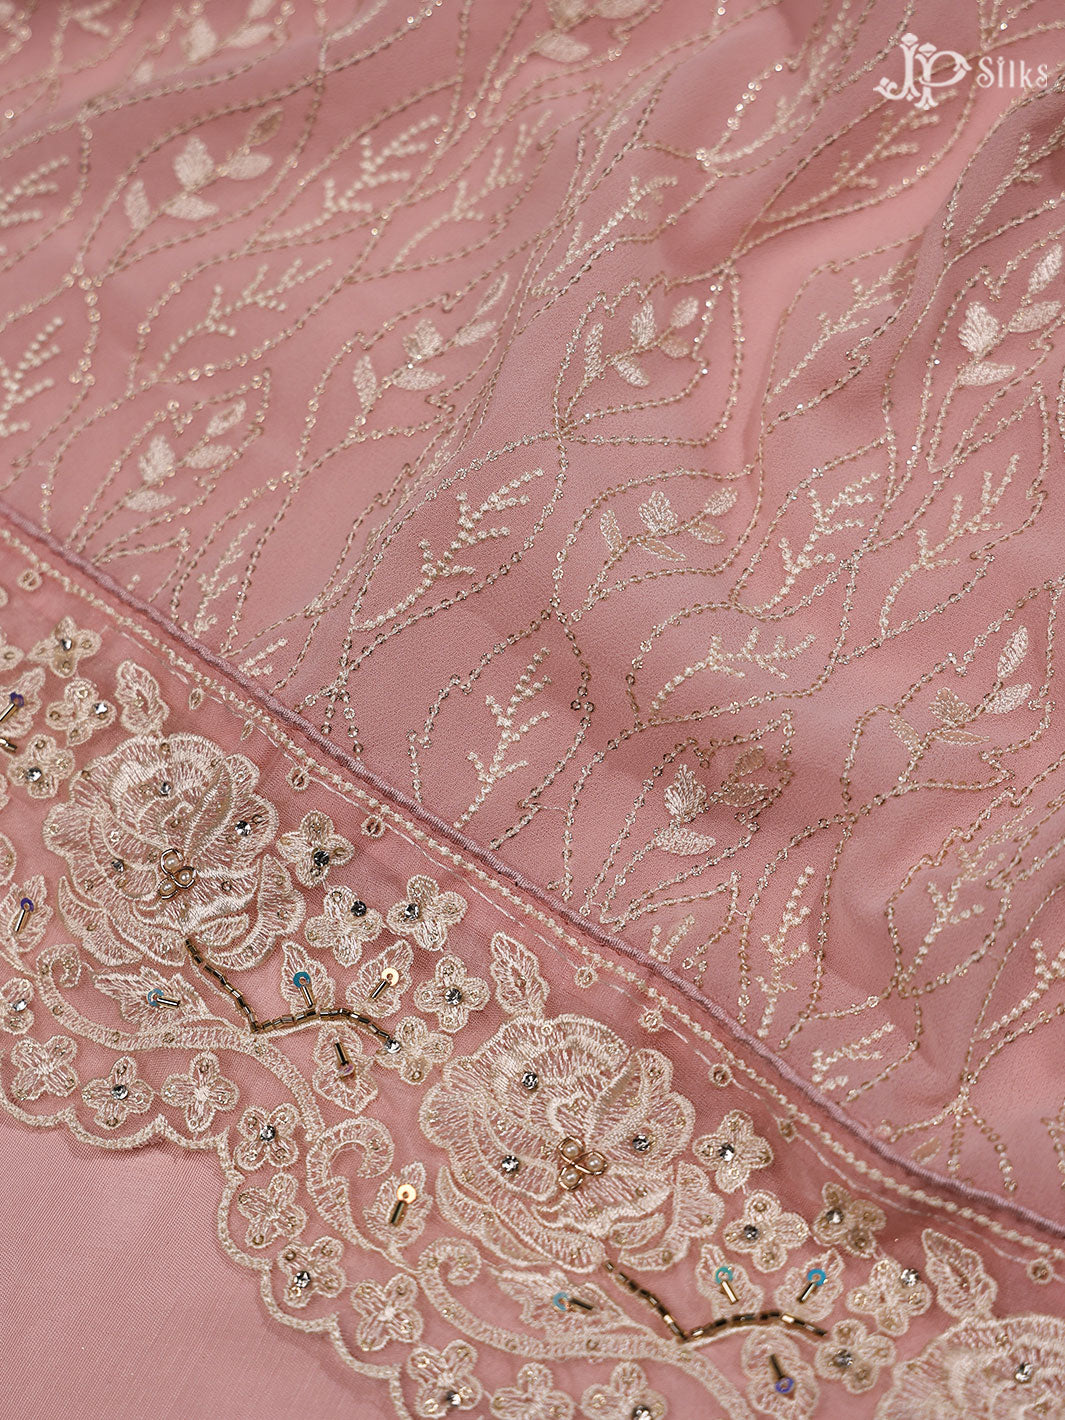 Pink Georgette Unstiched Chudidhar Material - E3537 - View 4